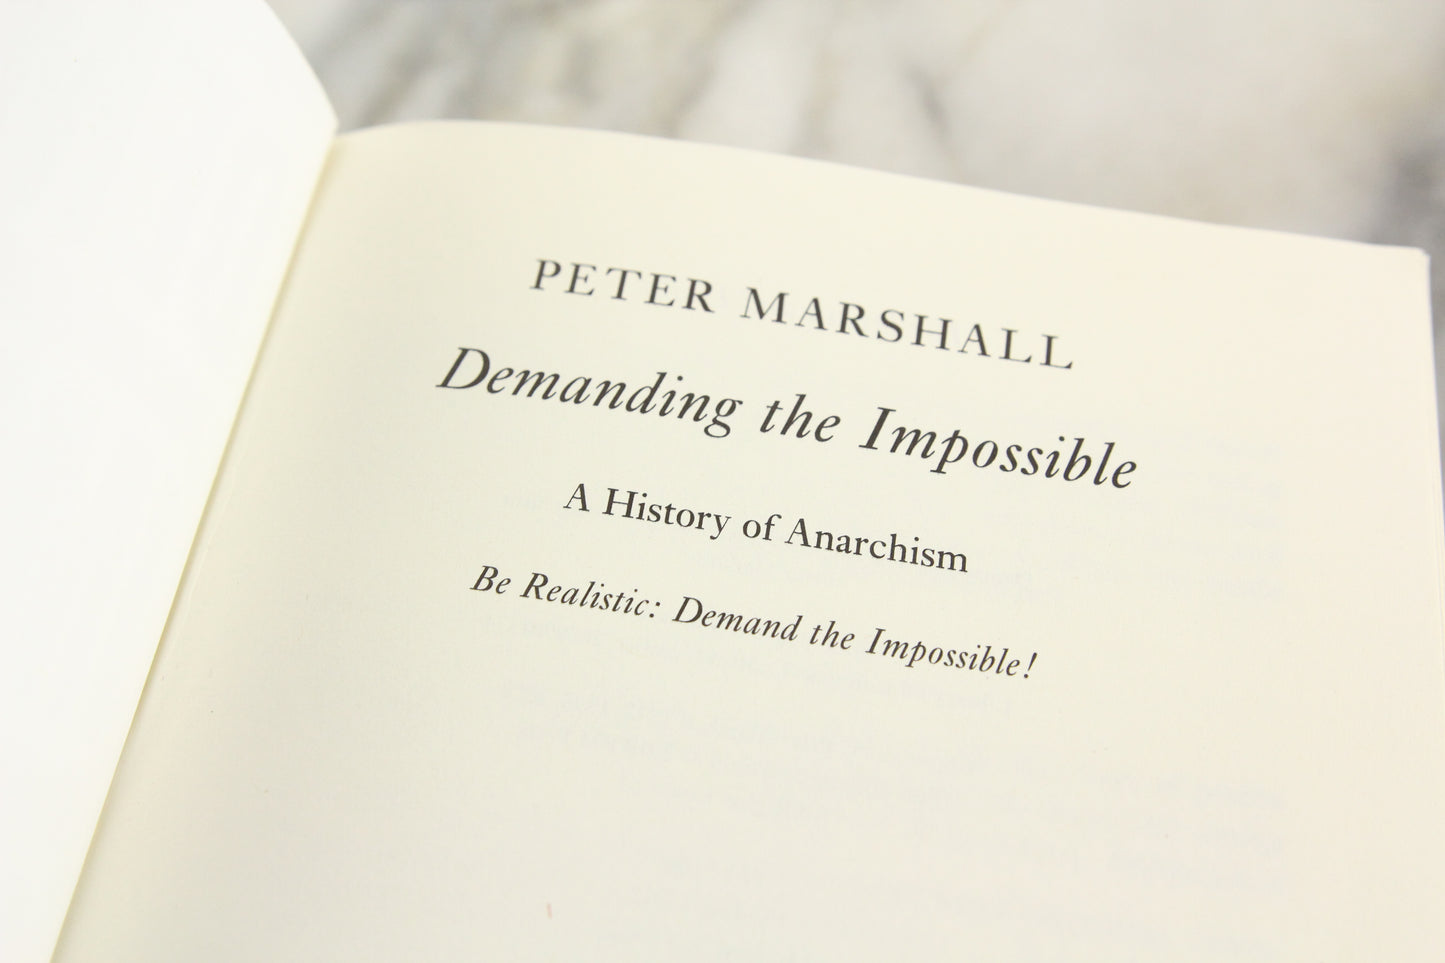 Demanding the Impossible: A History of Anarchism by Peter Marshall, Copyright 2010